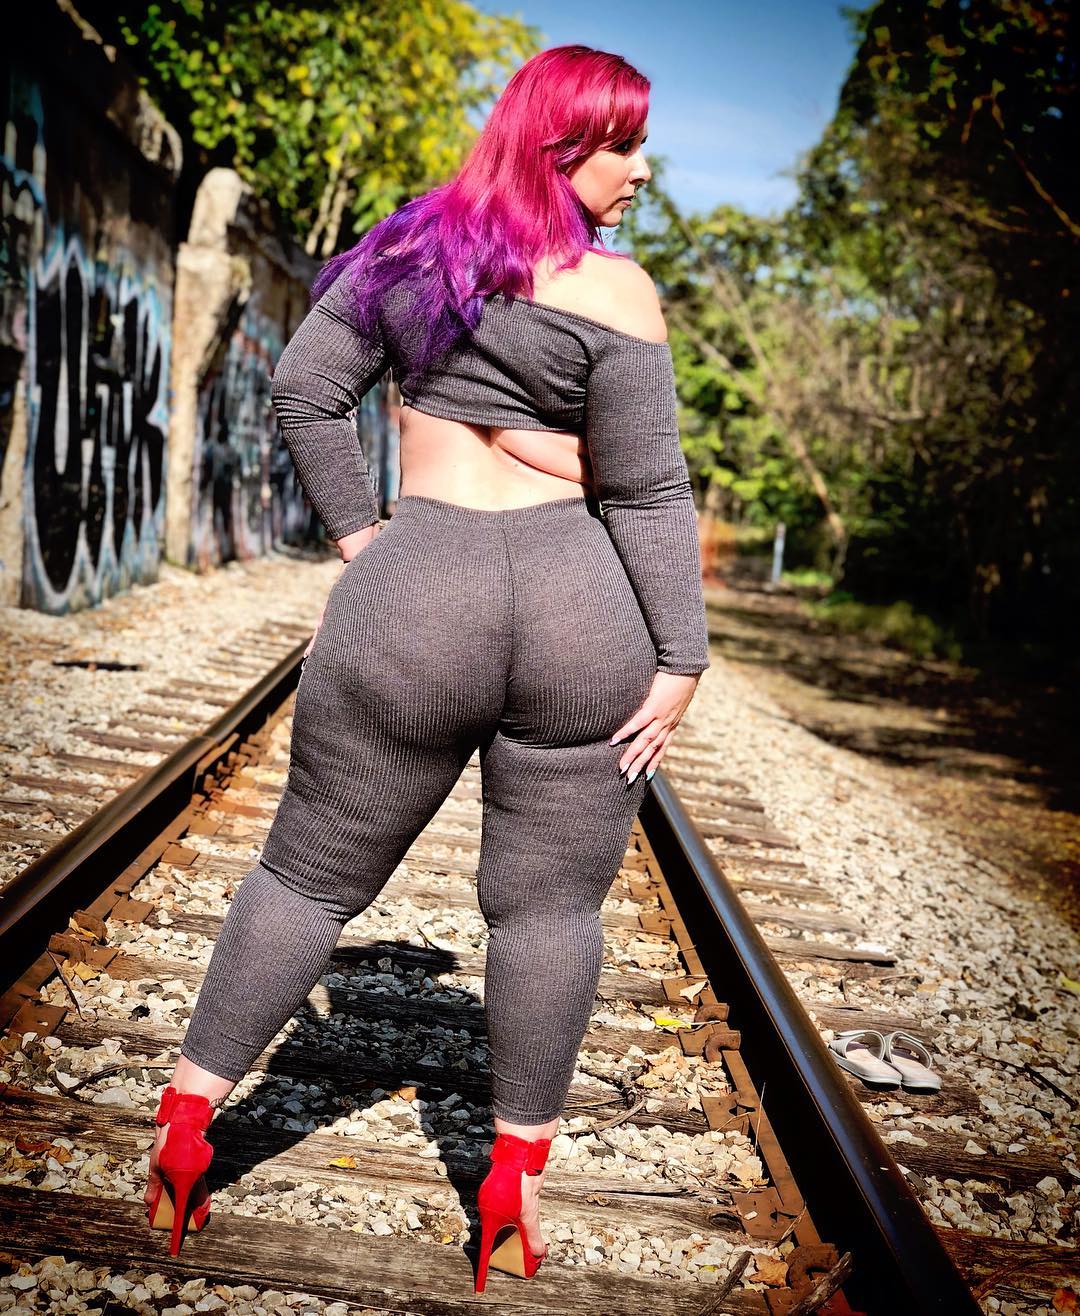 Thicker Paige Porcelain on the tracks